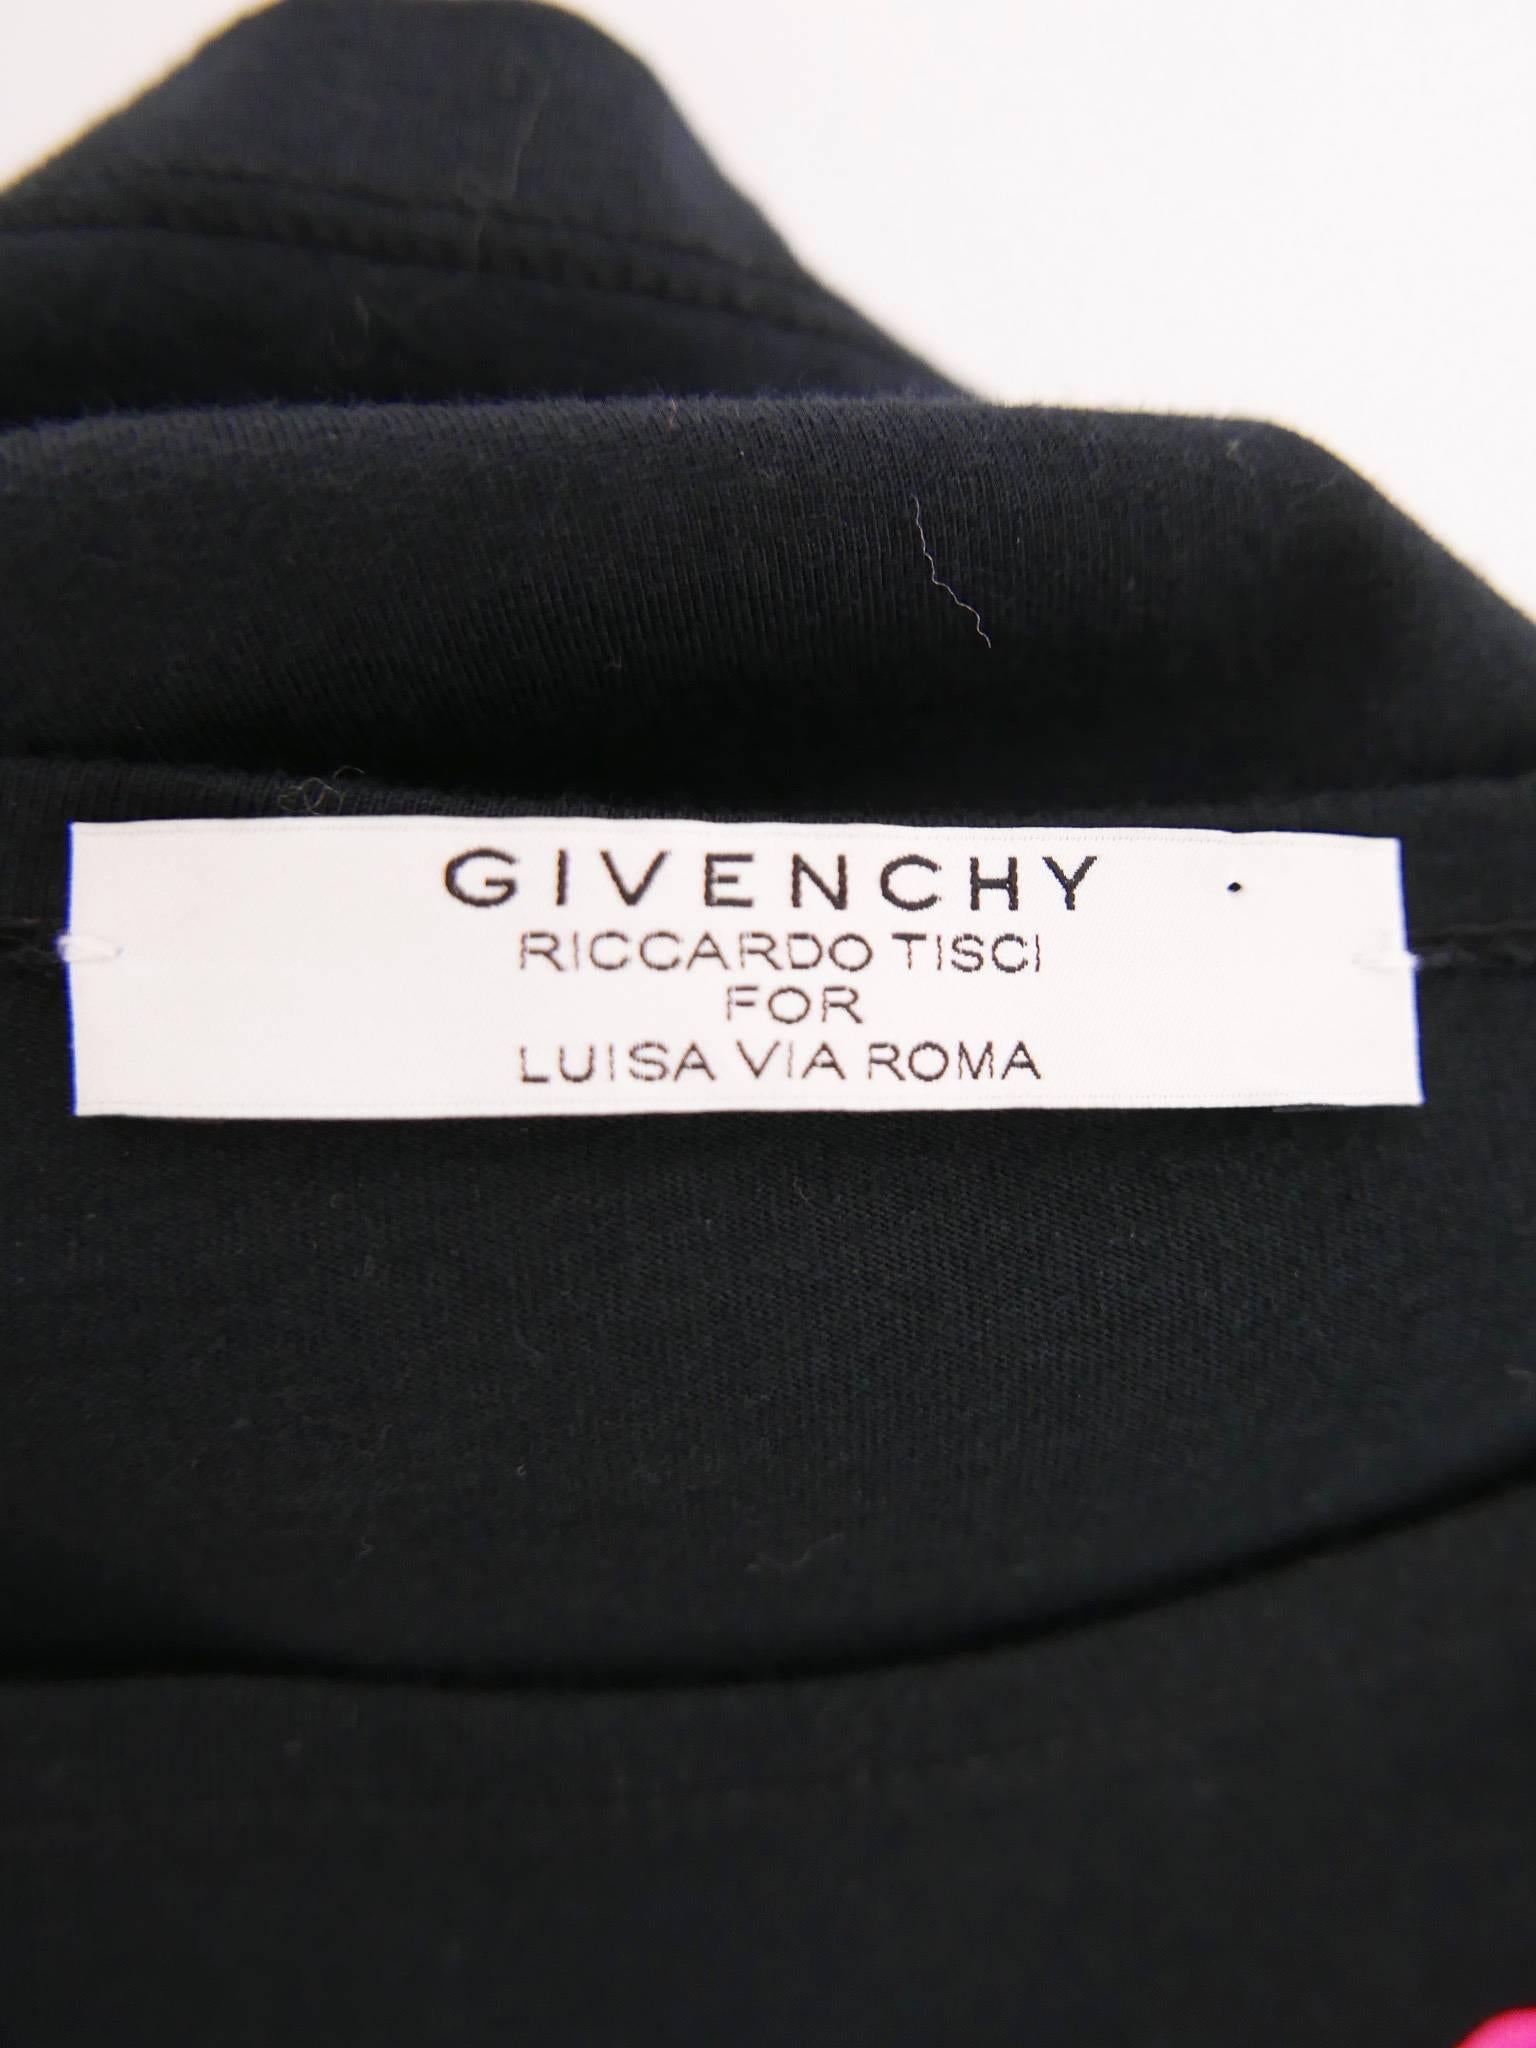 GIVENCHY by Riccardo Tisci Printed Oversize T-Shirt 1